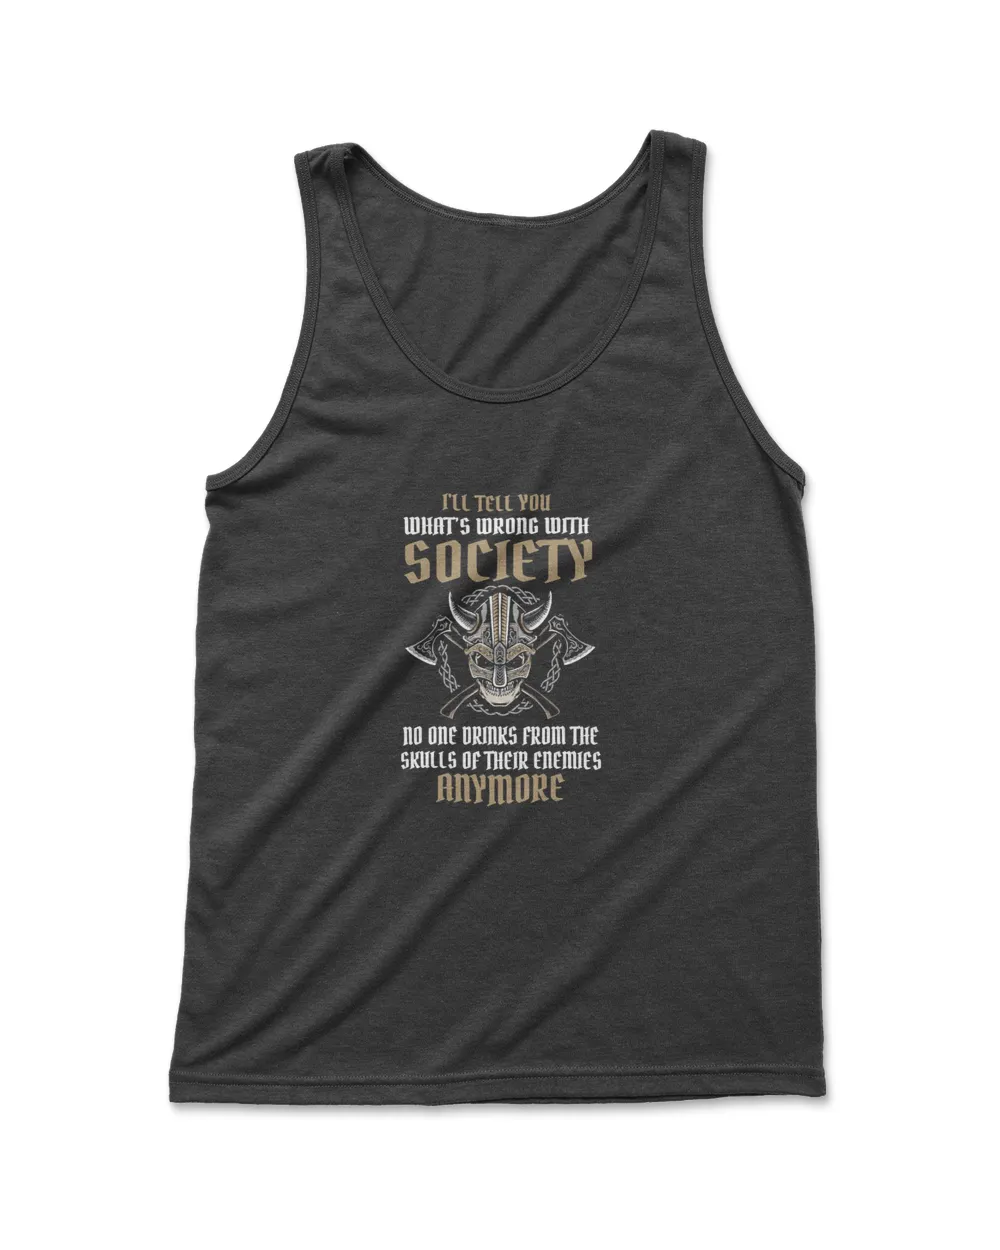 Wrong Society Drink From The Skull Of Your Enemies Viking T-Shirt